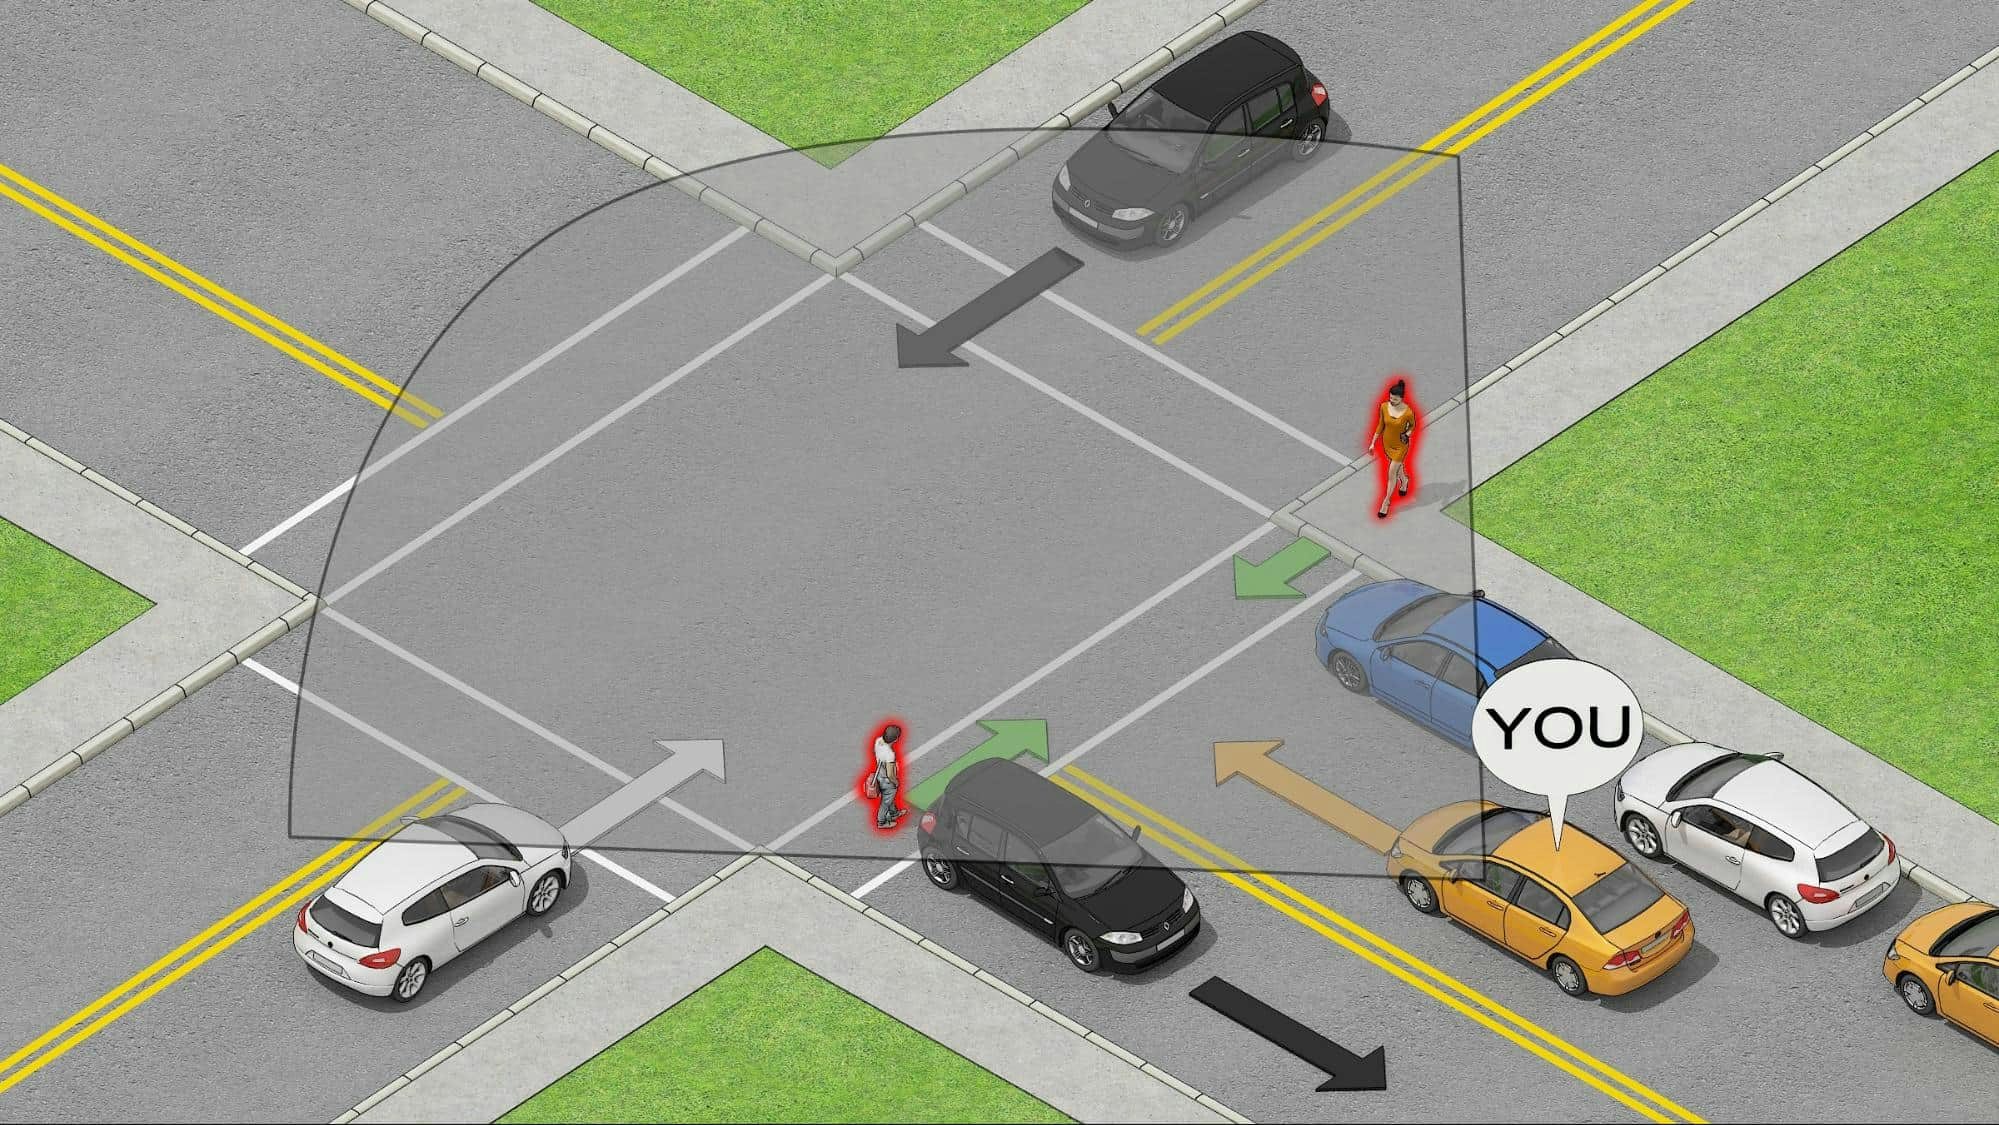 Car at intersection with pedestrians hidden from view